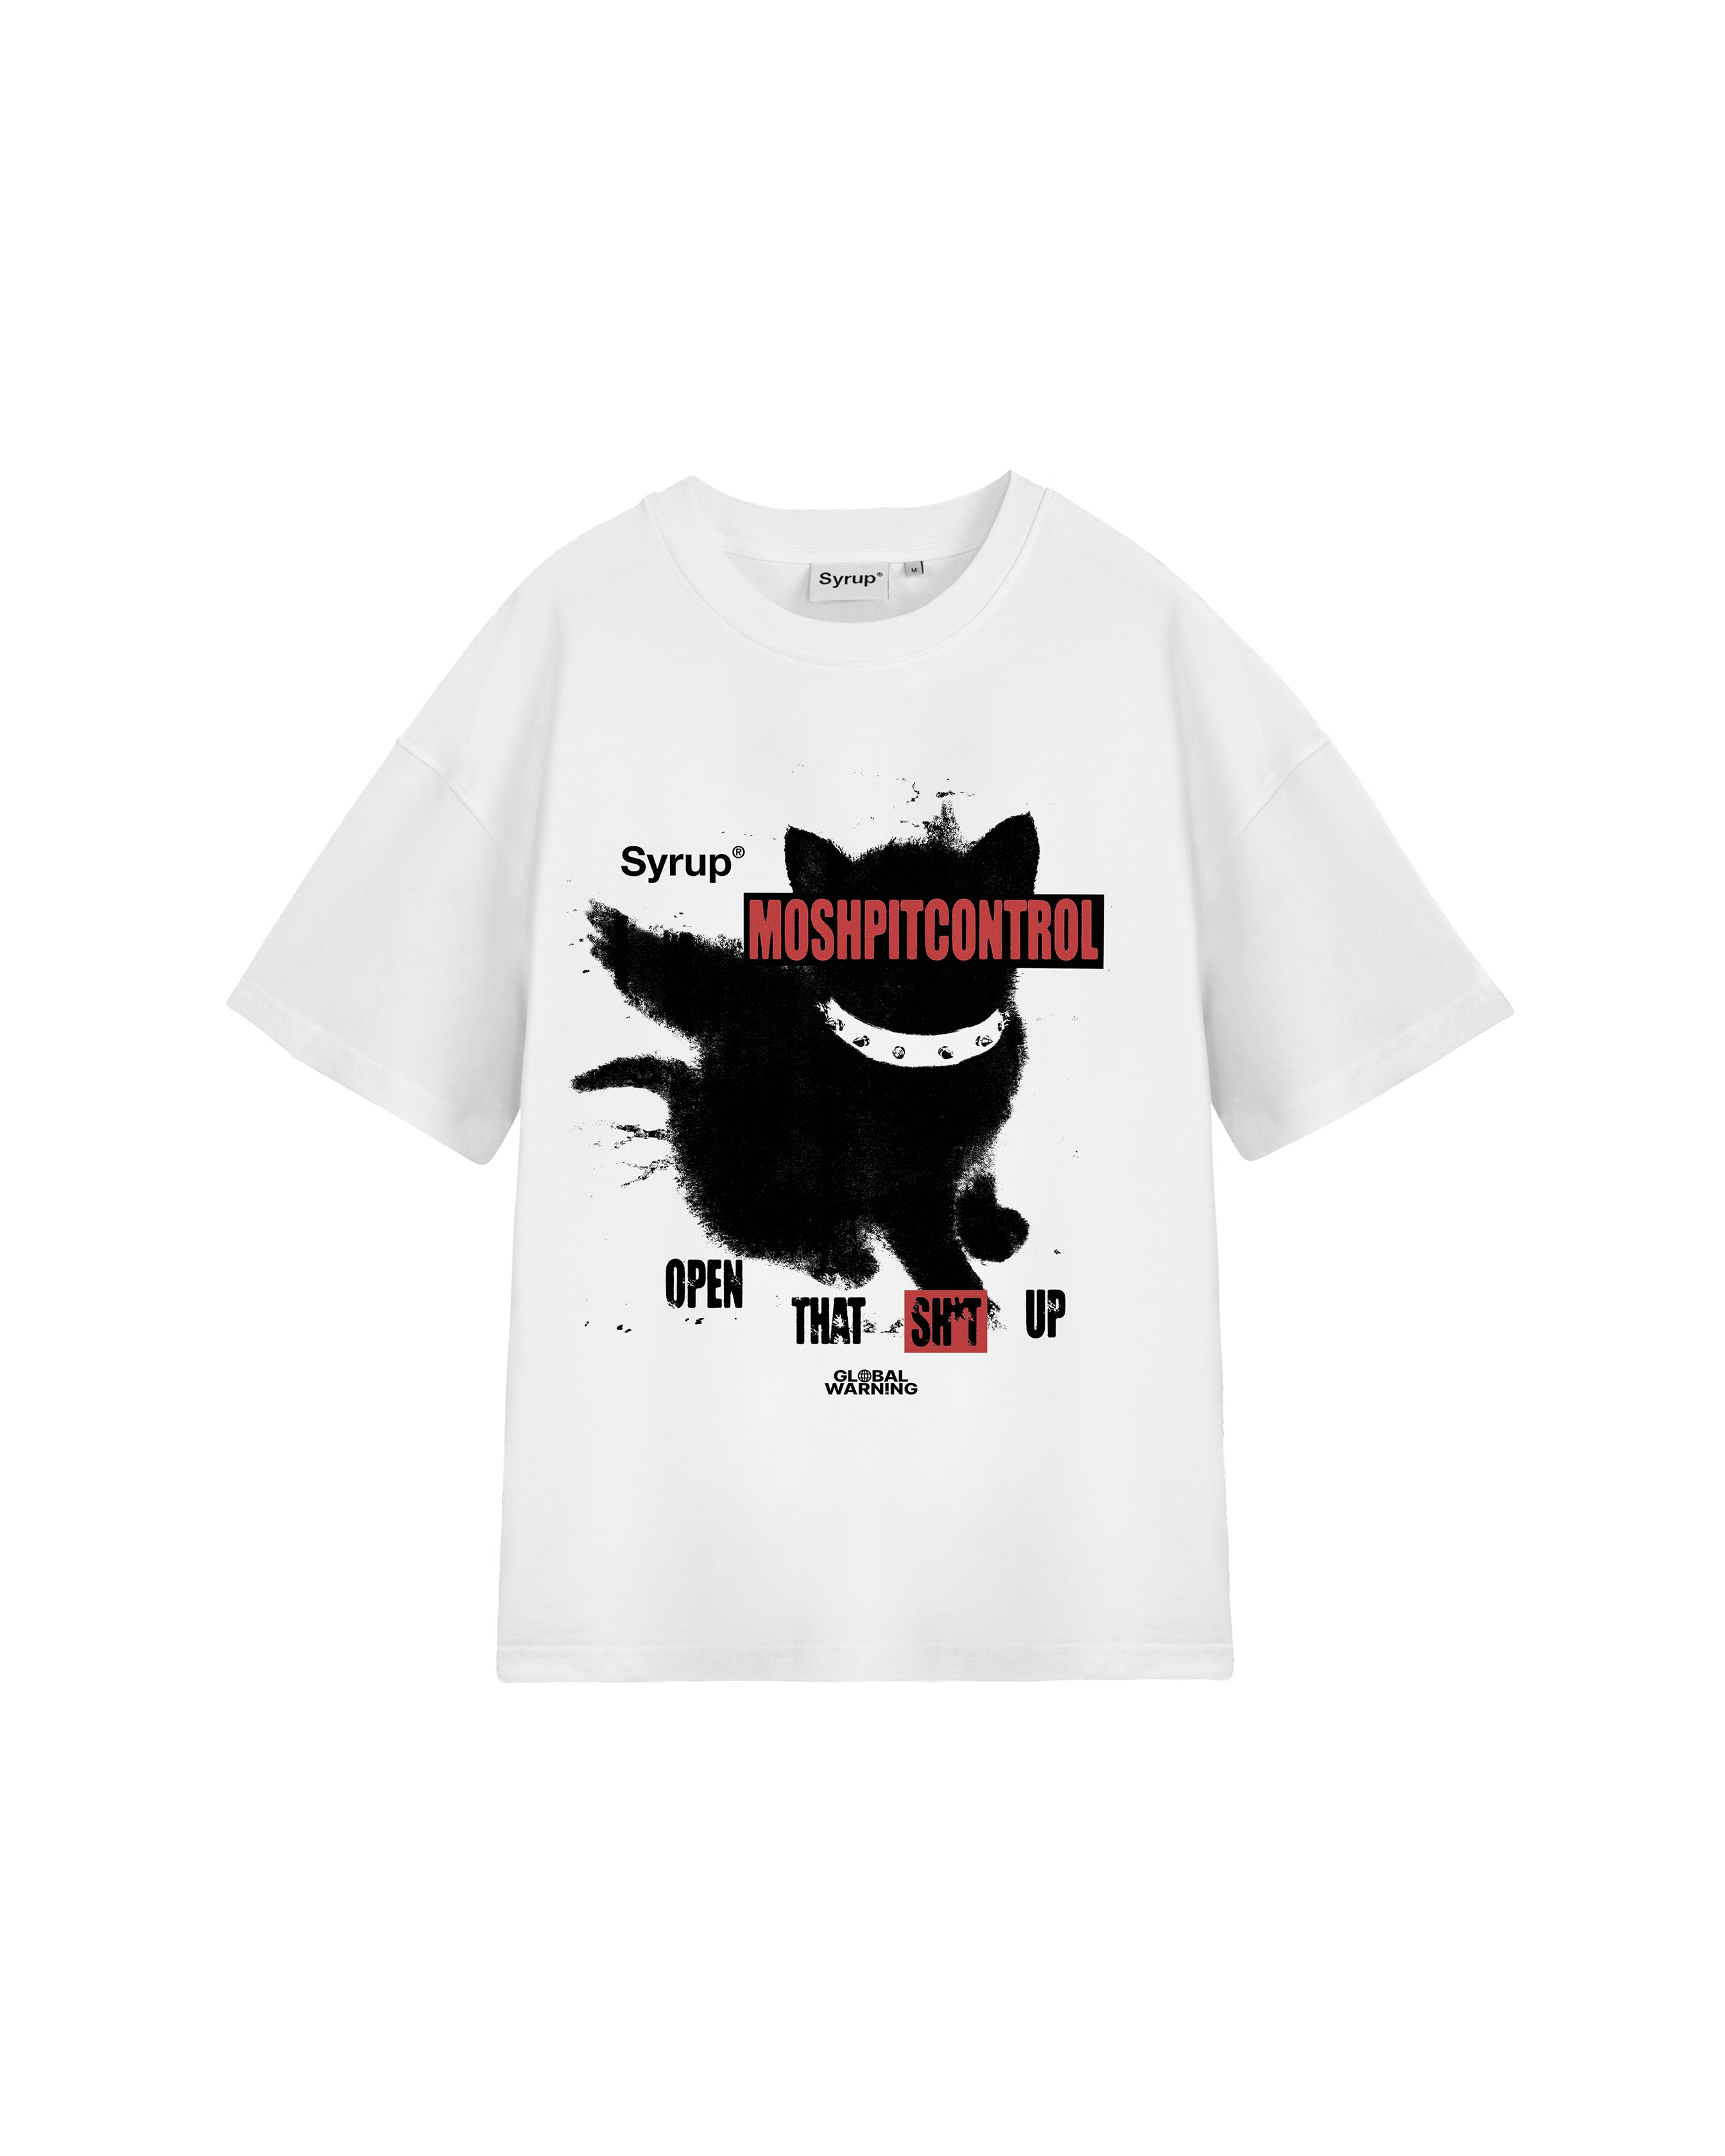 Global Warning x Syrup Moshpit Tee (White)